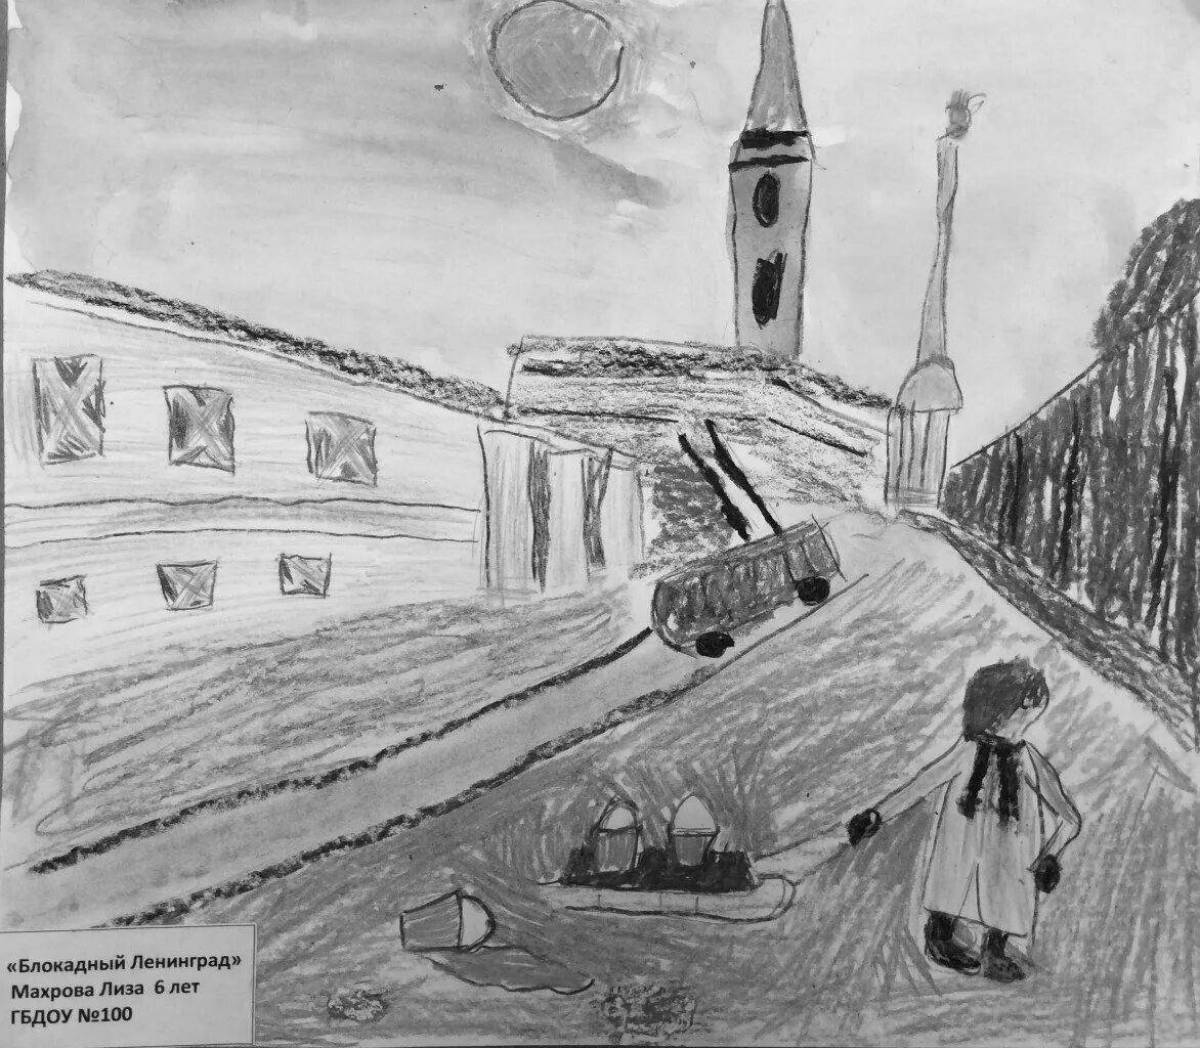 Coloring book inspiring removal of the siege of leningrad